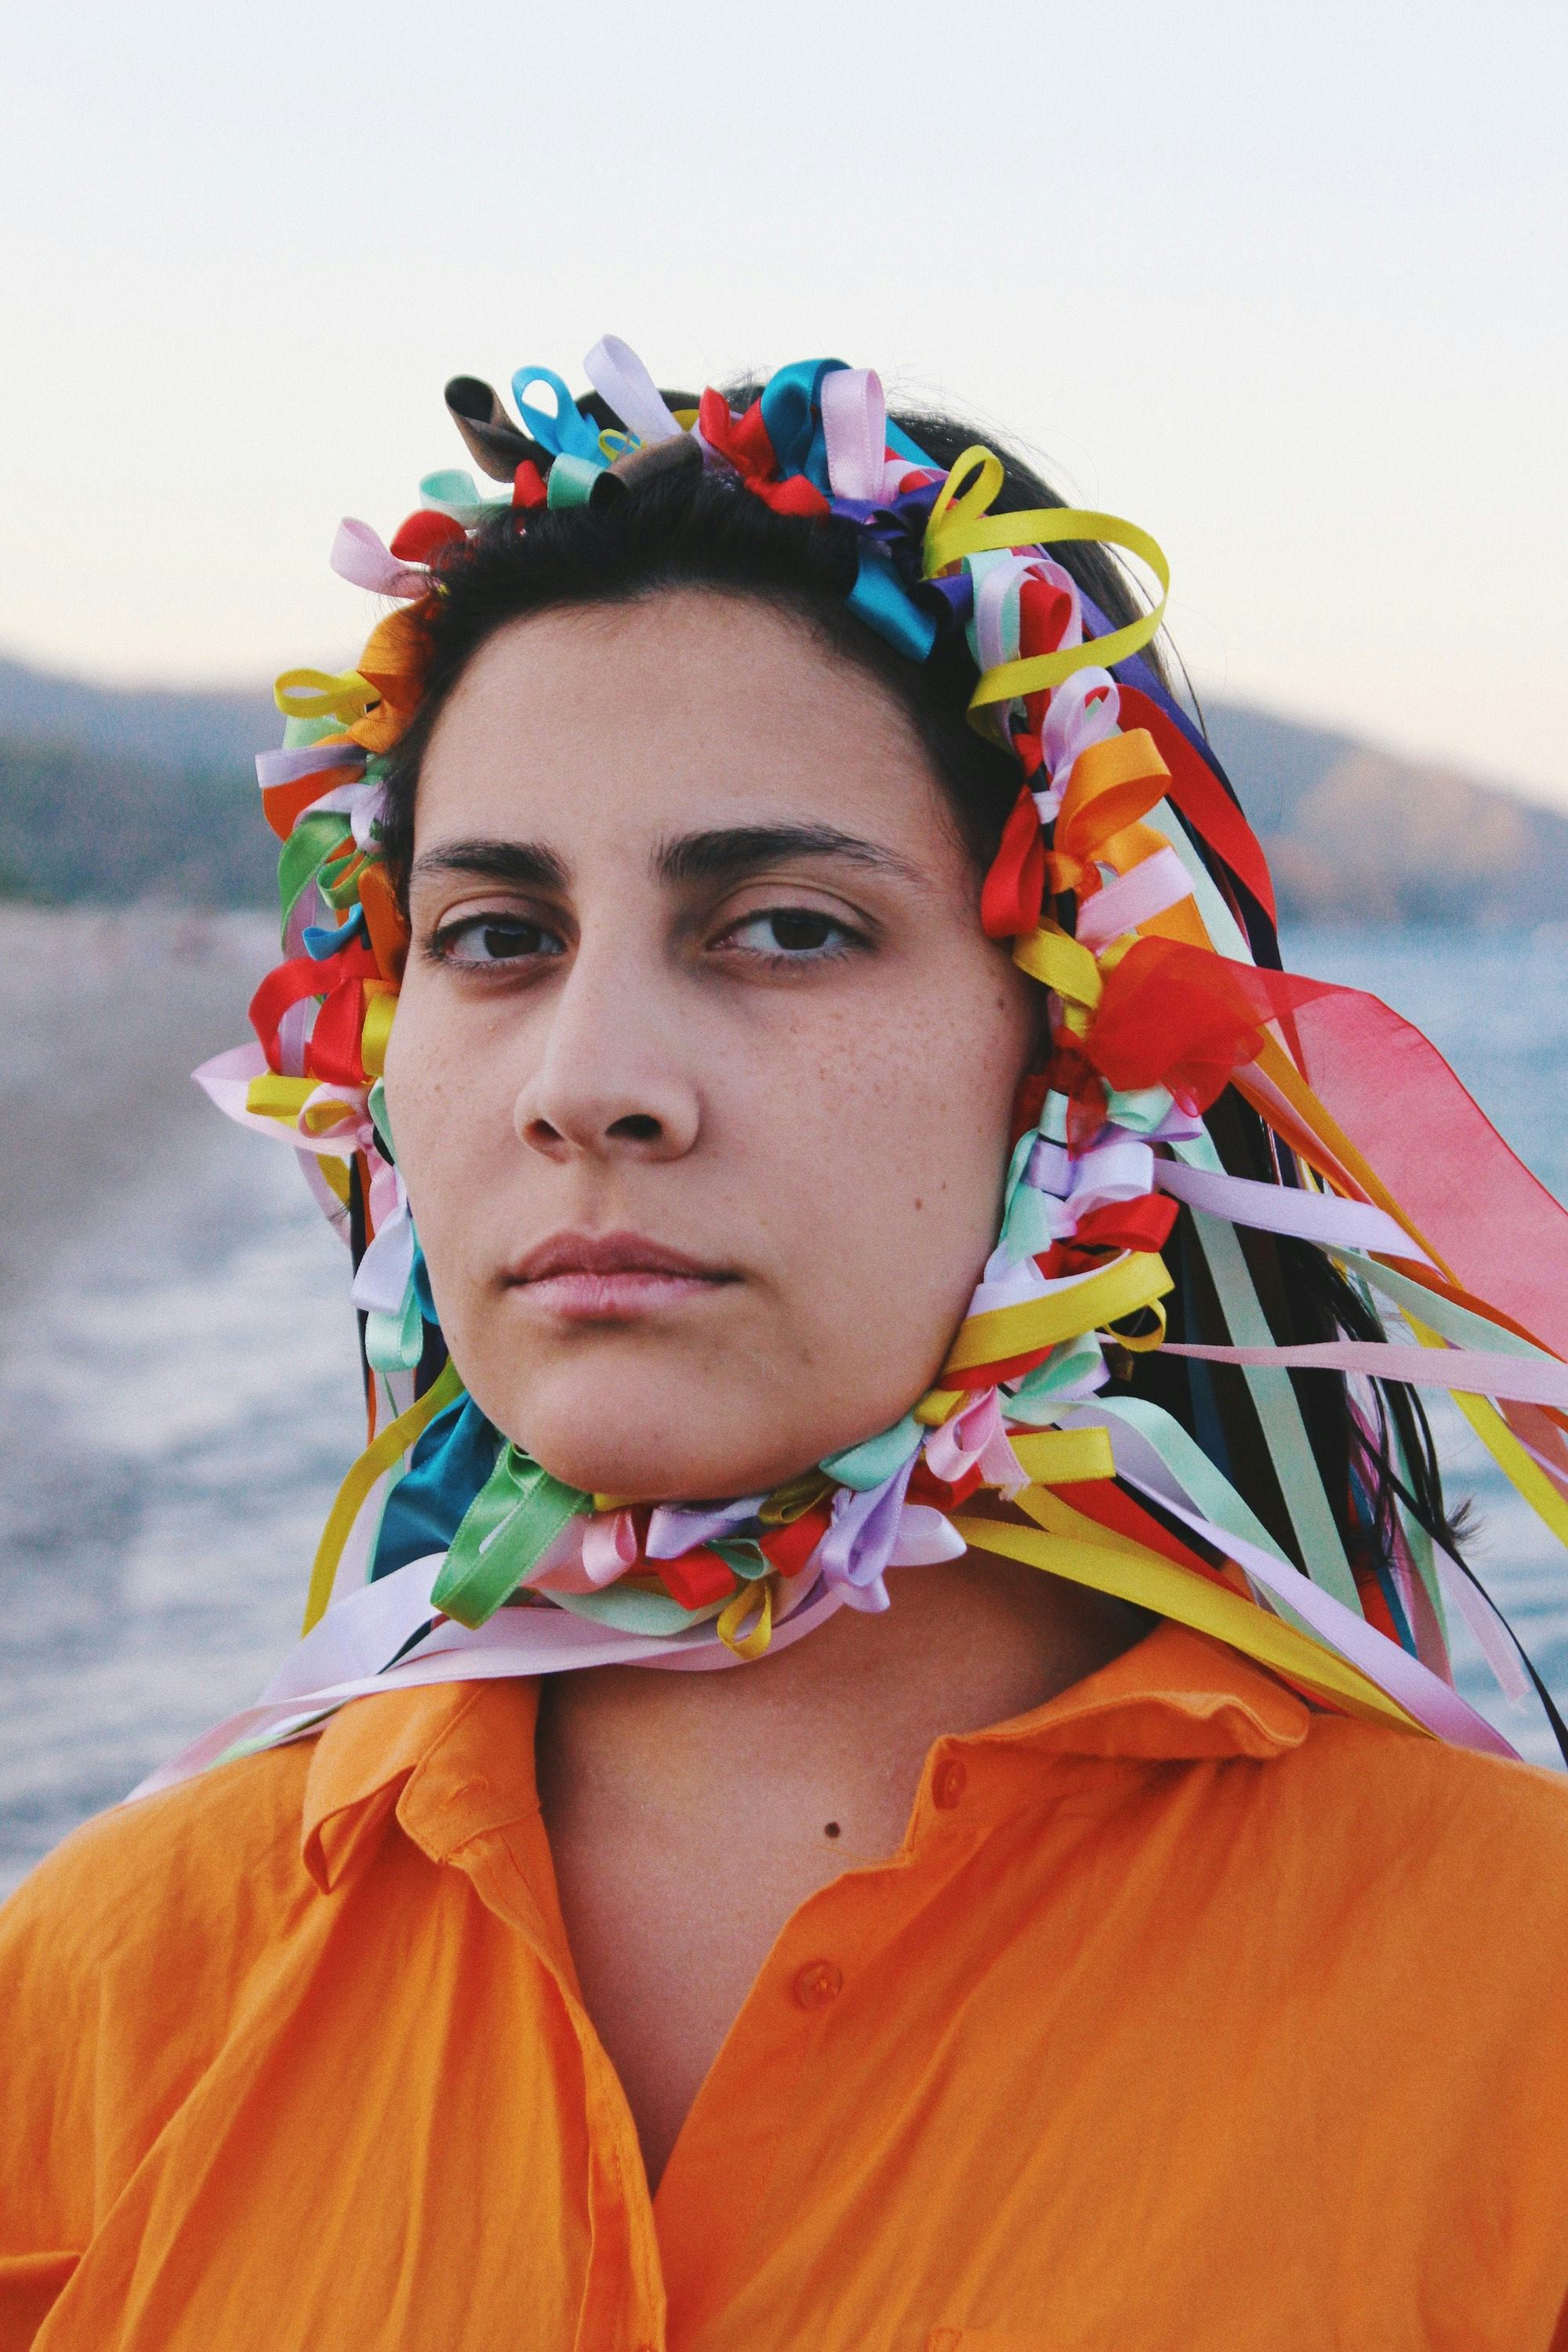 Portrait of a woman wearing an orange shirt, and a crown made of colourful ribbons. © Alp Peker